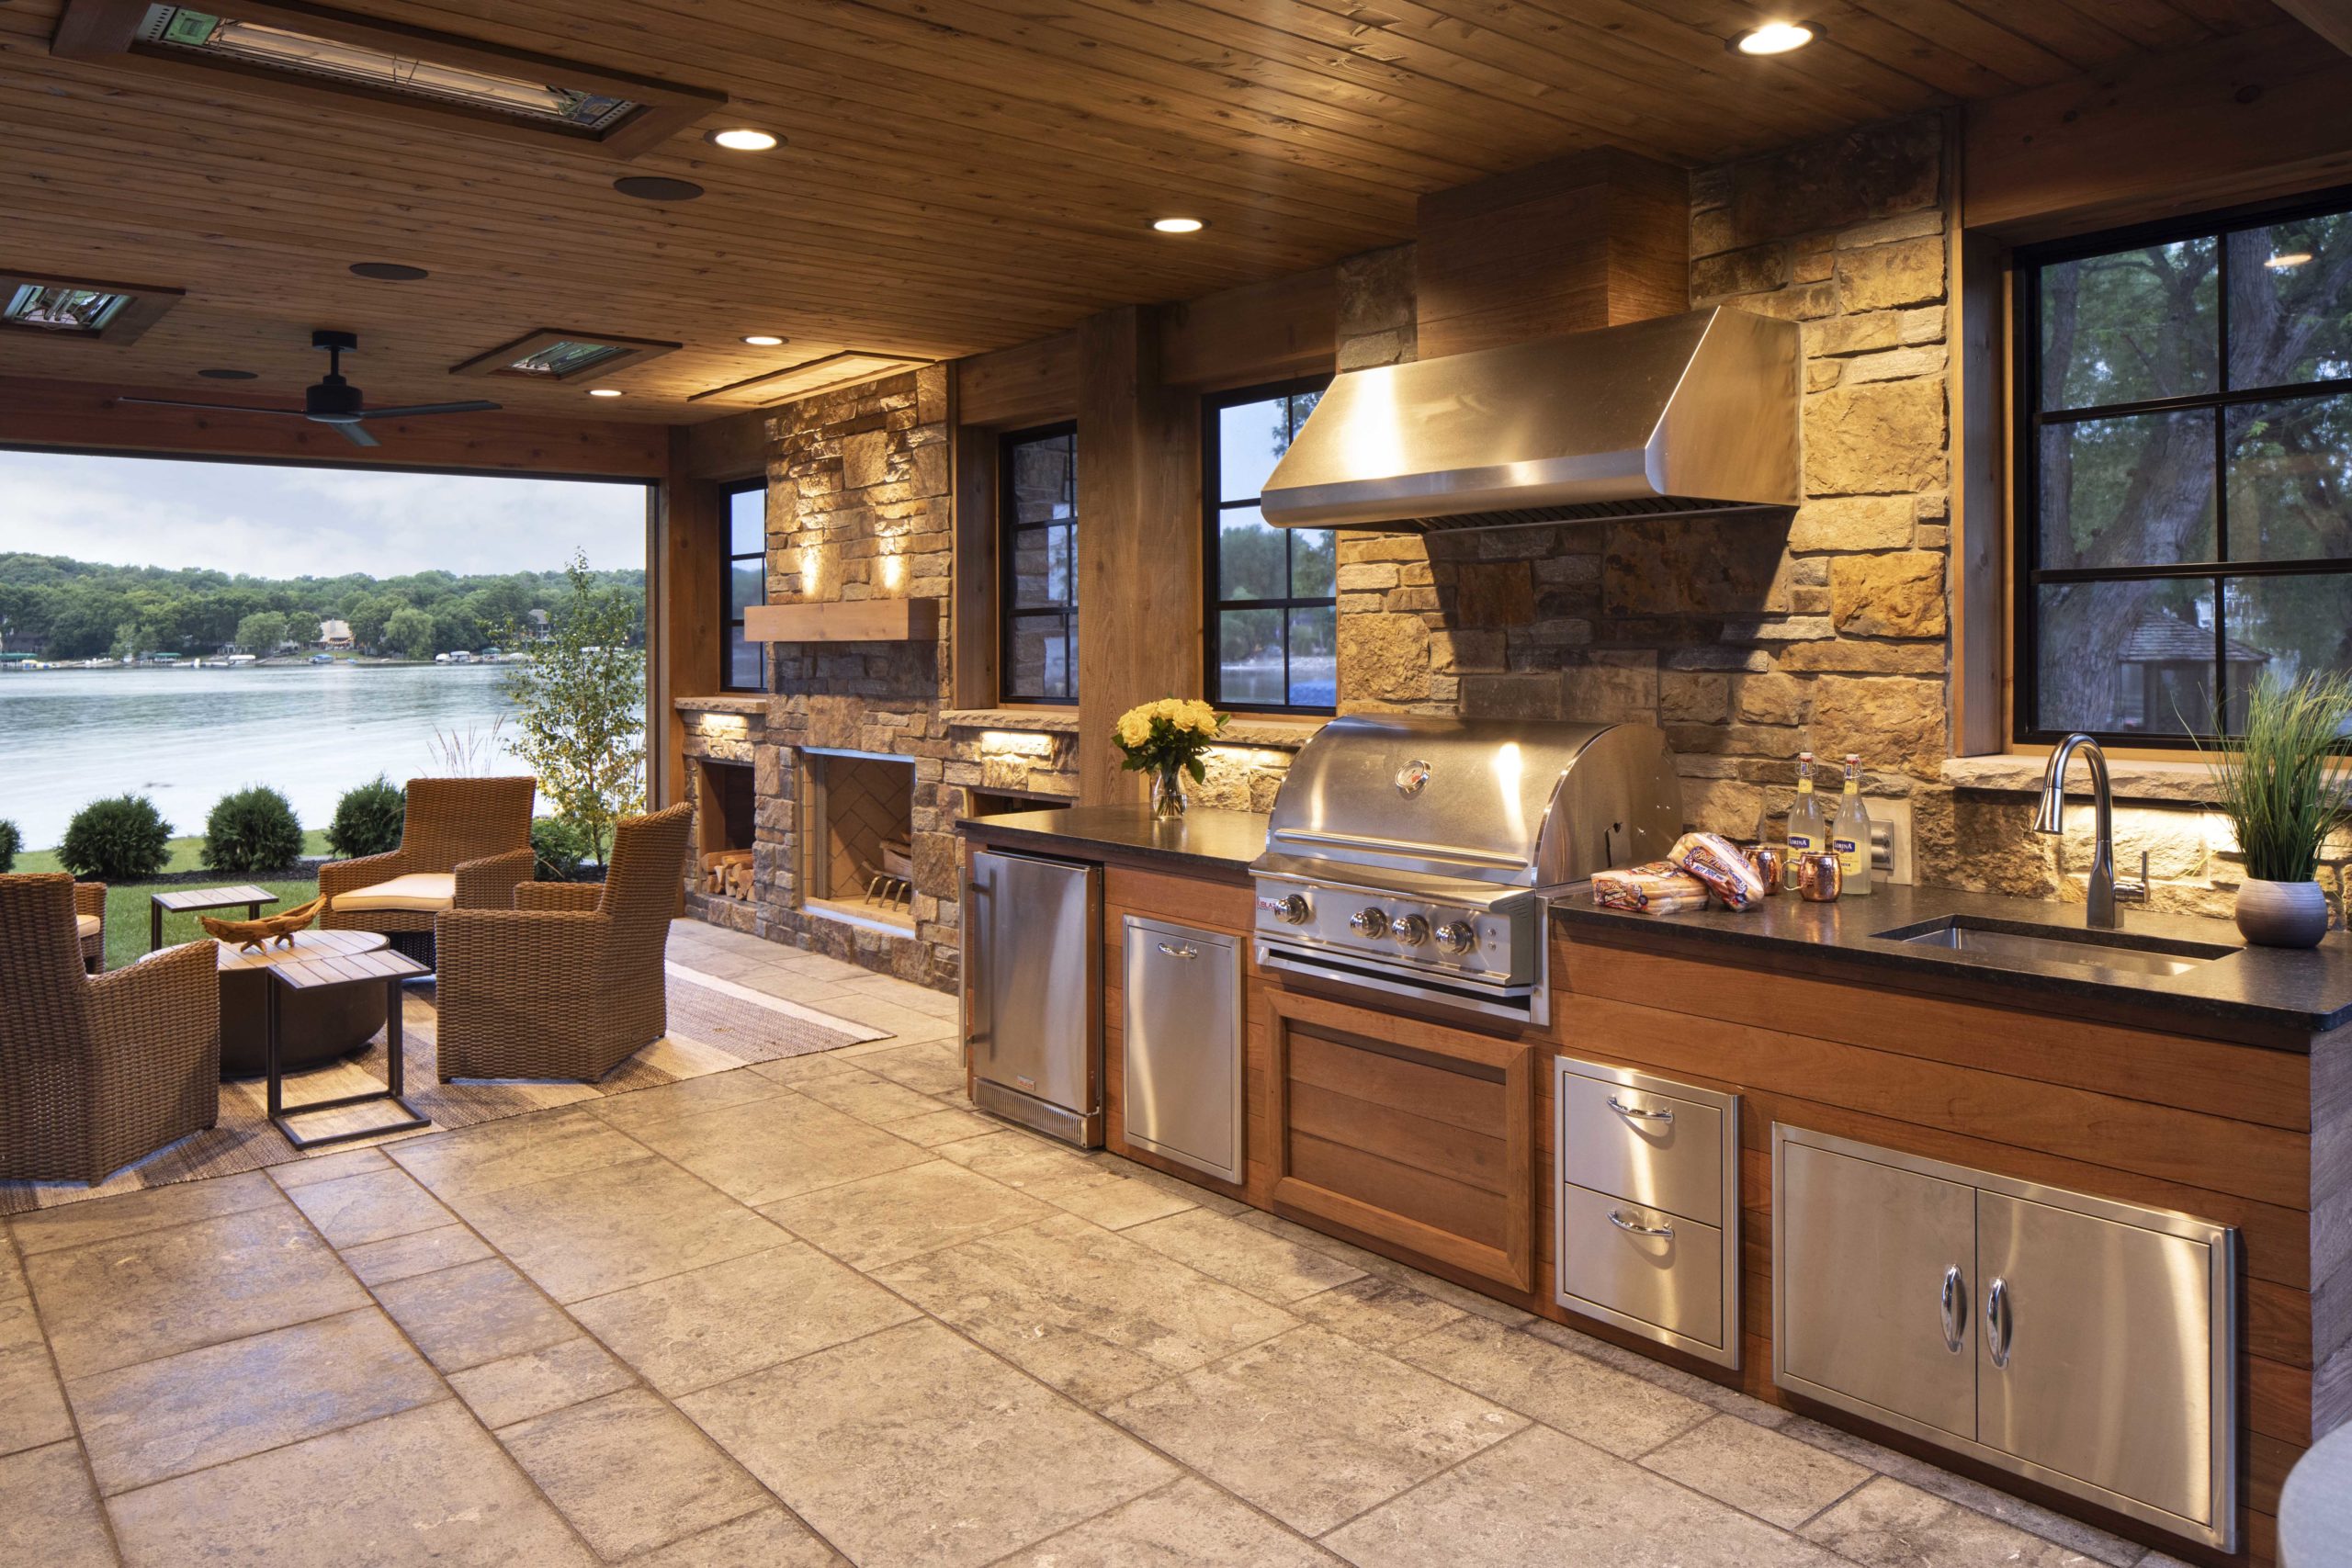 Custom home remodel: An outdoor kitchen featuring a grill and fireplace.